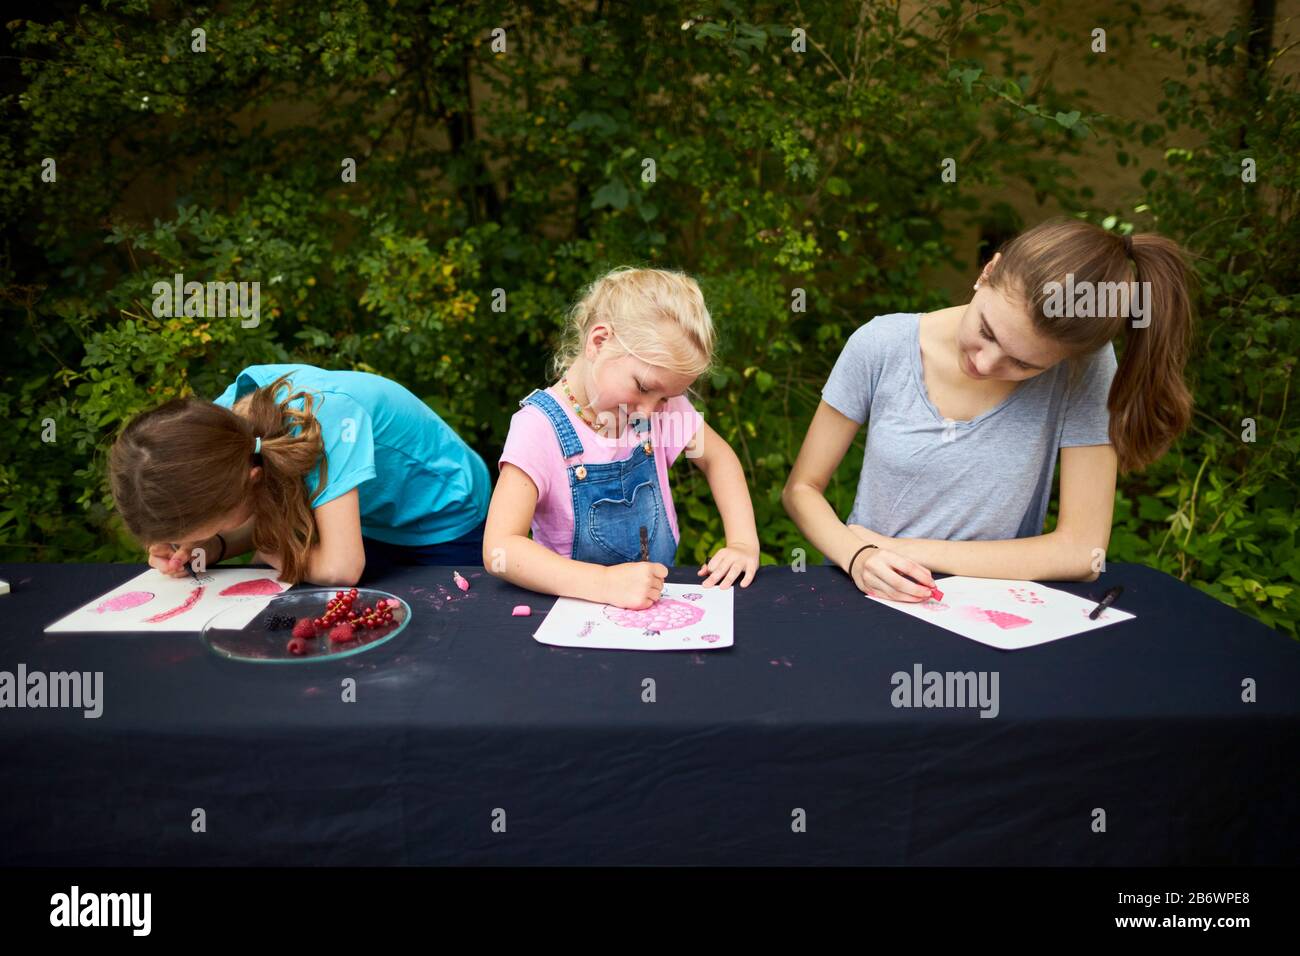 Children investigating food. Series: Painting fruit, in this case red berries. Learning according to the Reggio Pedagogy principle, playful understanding and discovery. Germany. Stock Photo